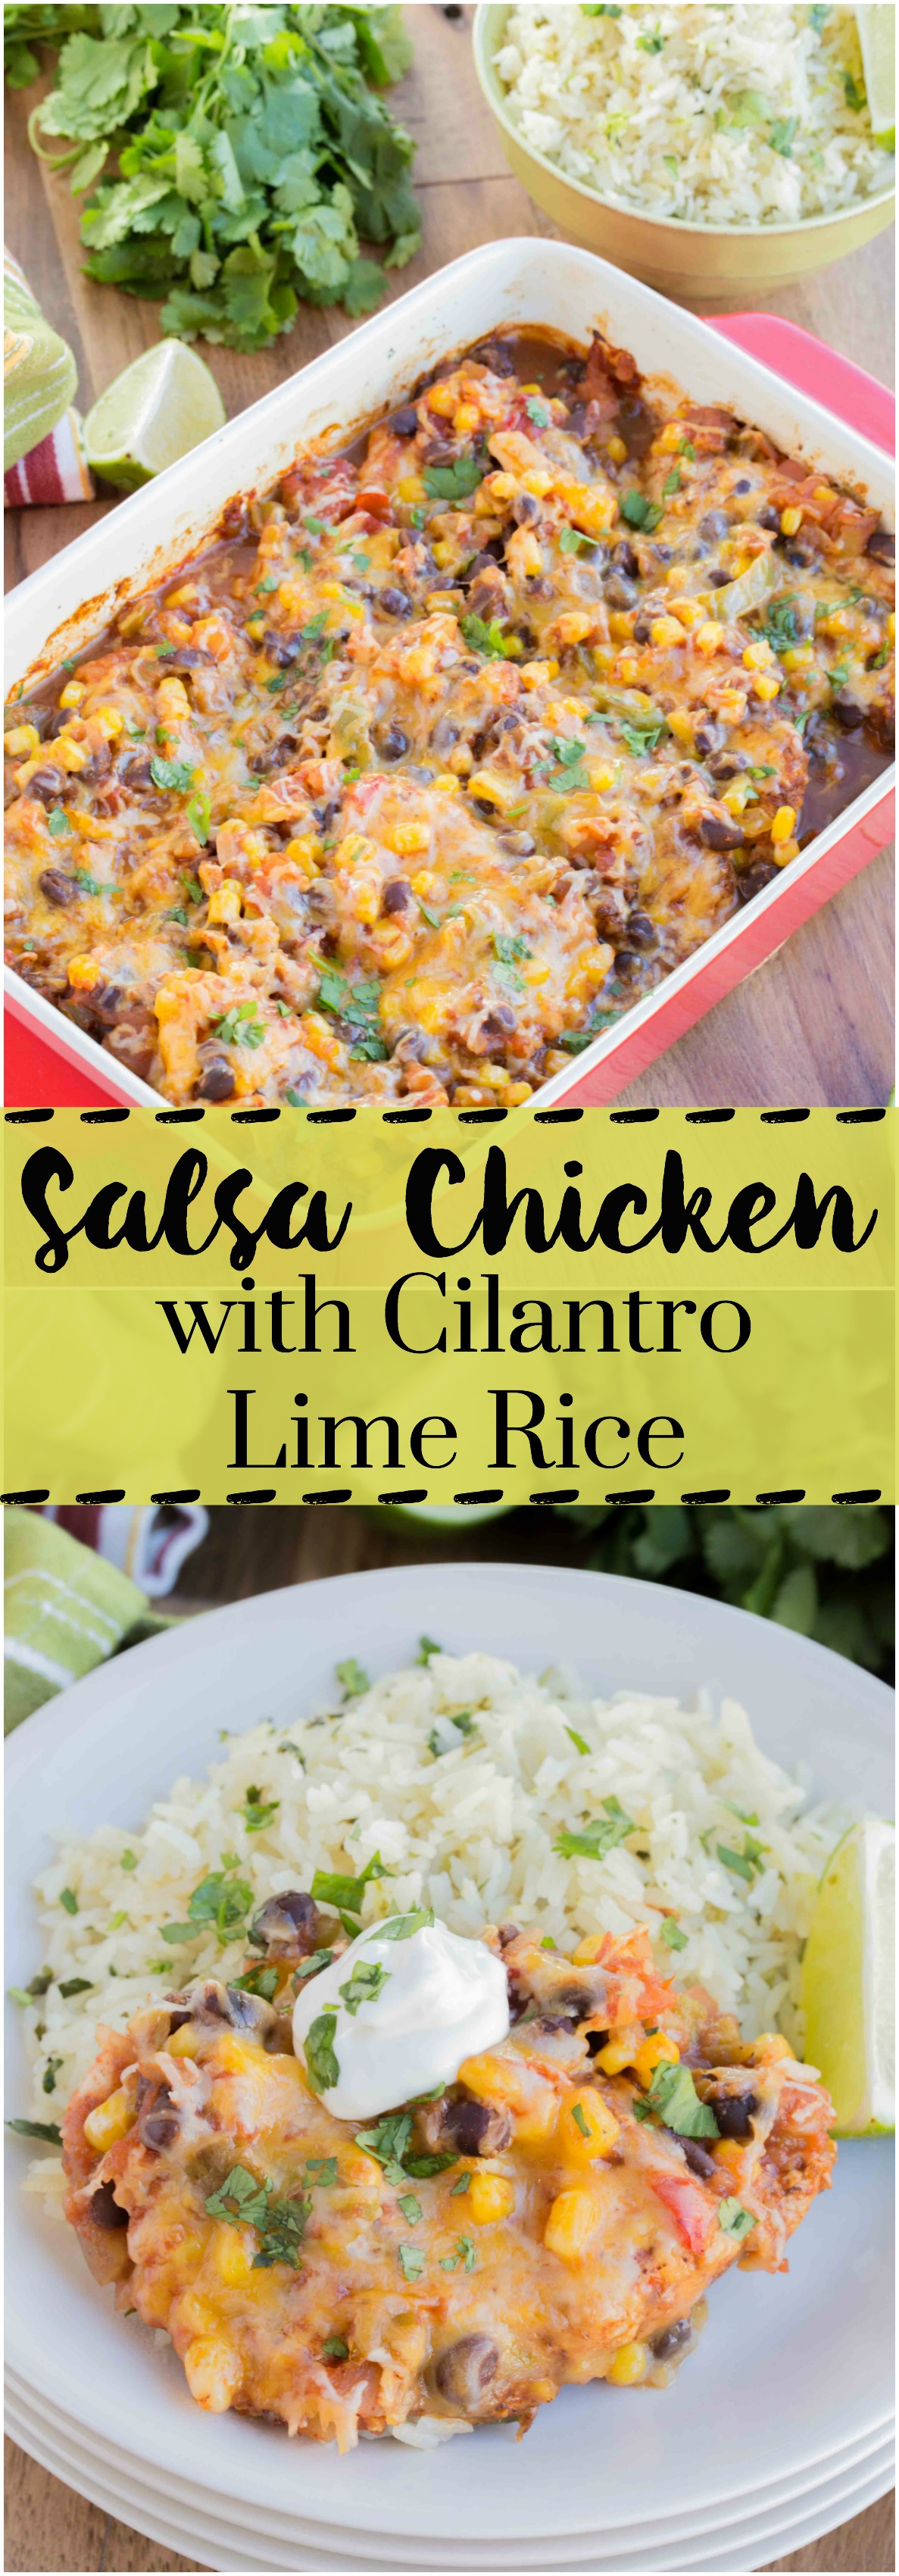 Salsa Chicken with Cilantro Lime Rice is the perfect meal for those nights you don't want to think about dinner. Made within 40 minutes, this is one delicious dinner!